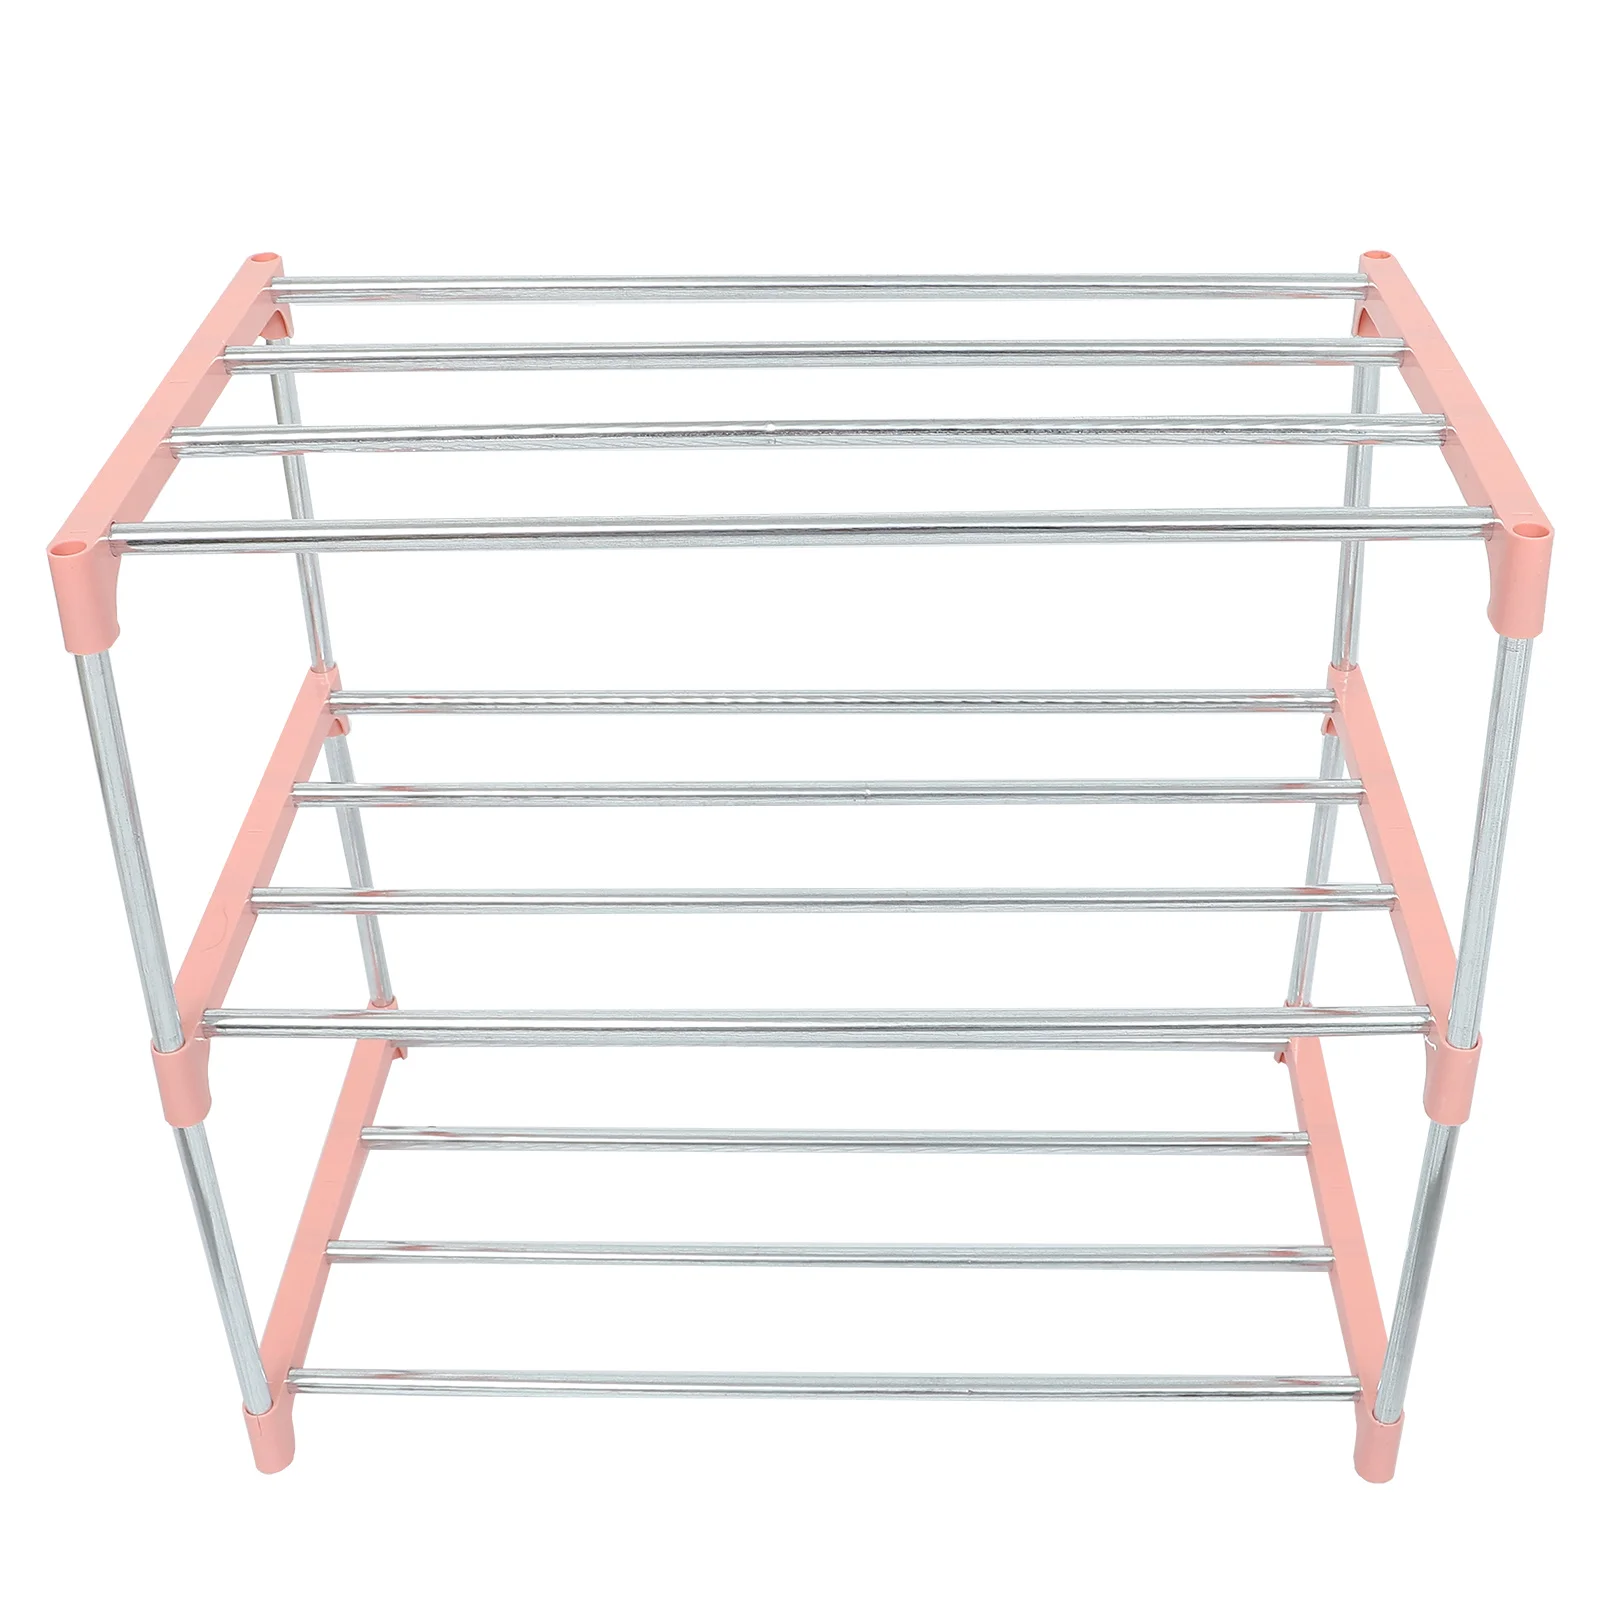 

Simple Multi Layer Shoe Rack Stainless Steel Easy Assemble Storage Shoe Cabinet Shoe Rack Hanger Home Organizer Accessories #G